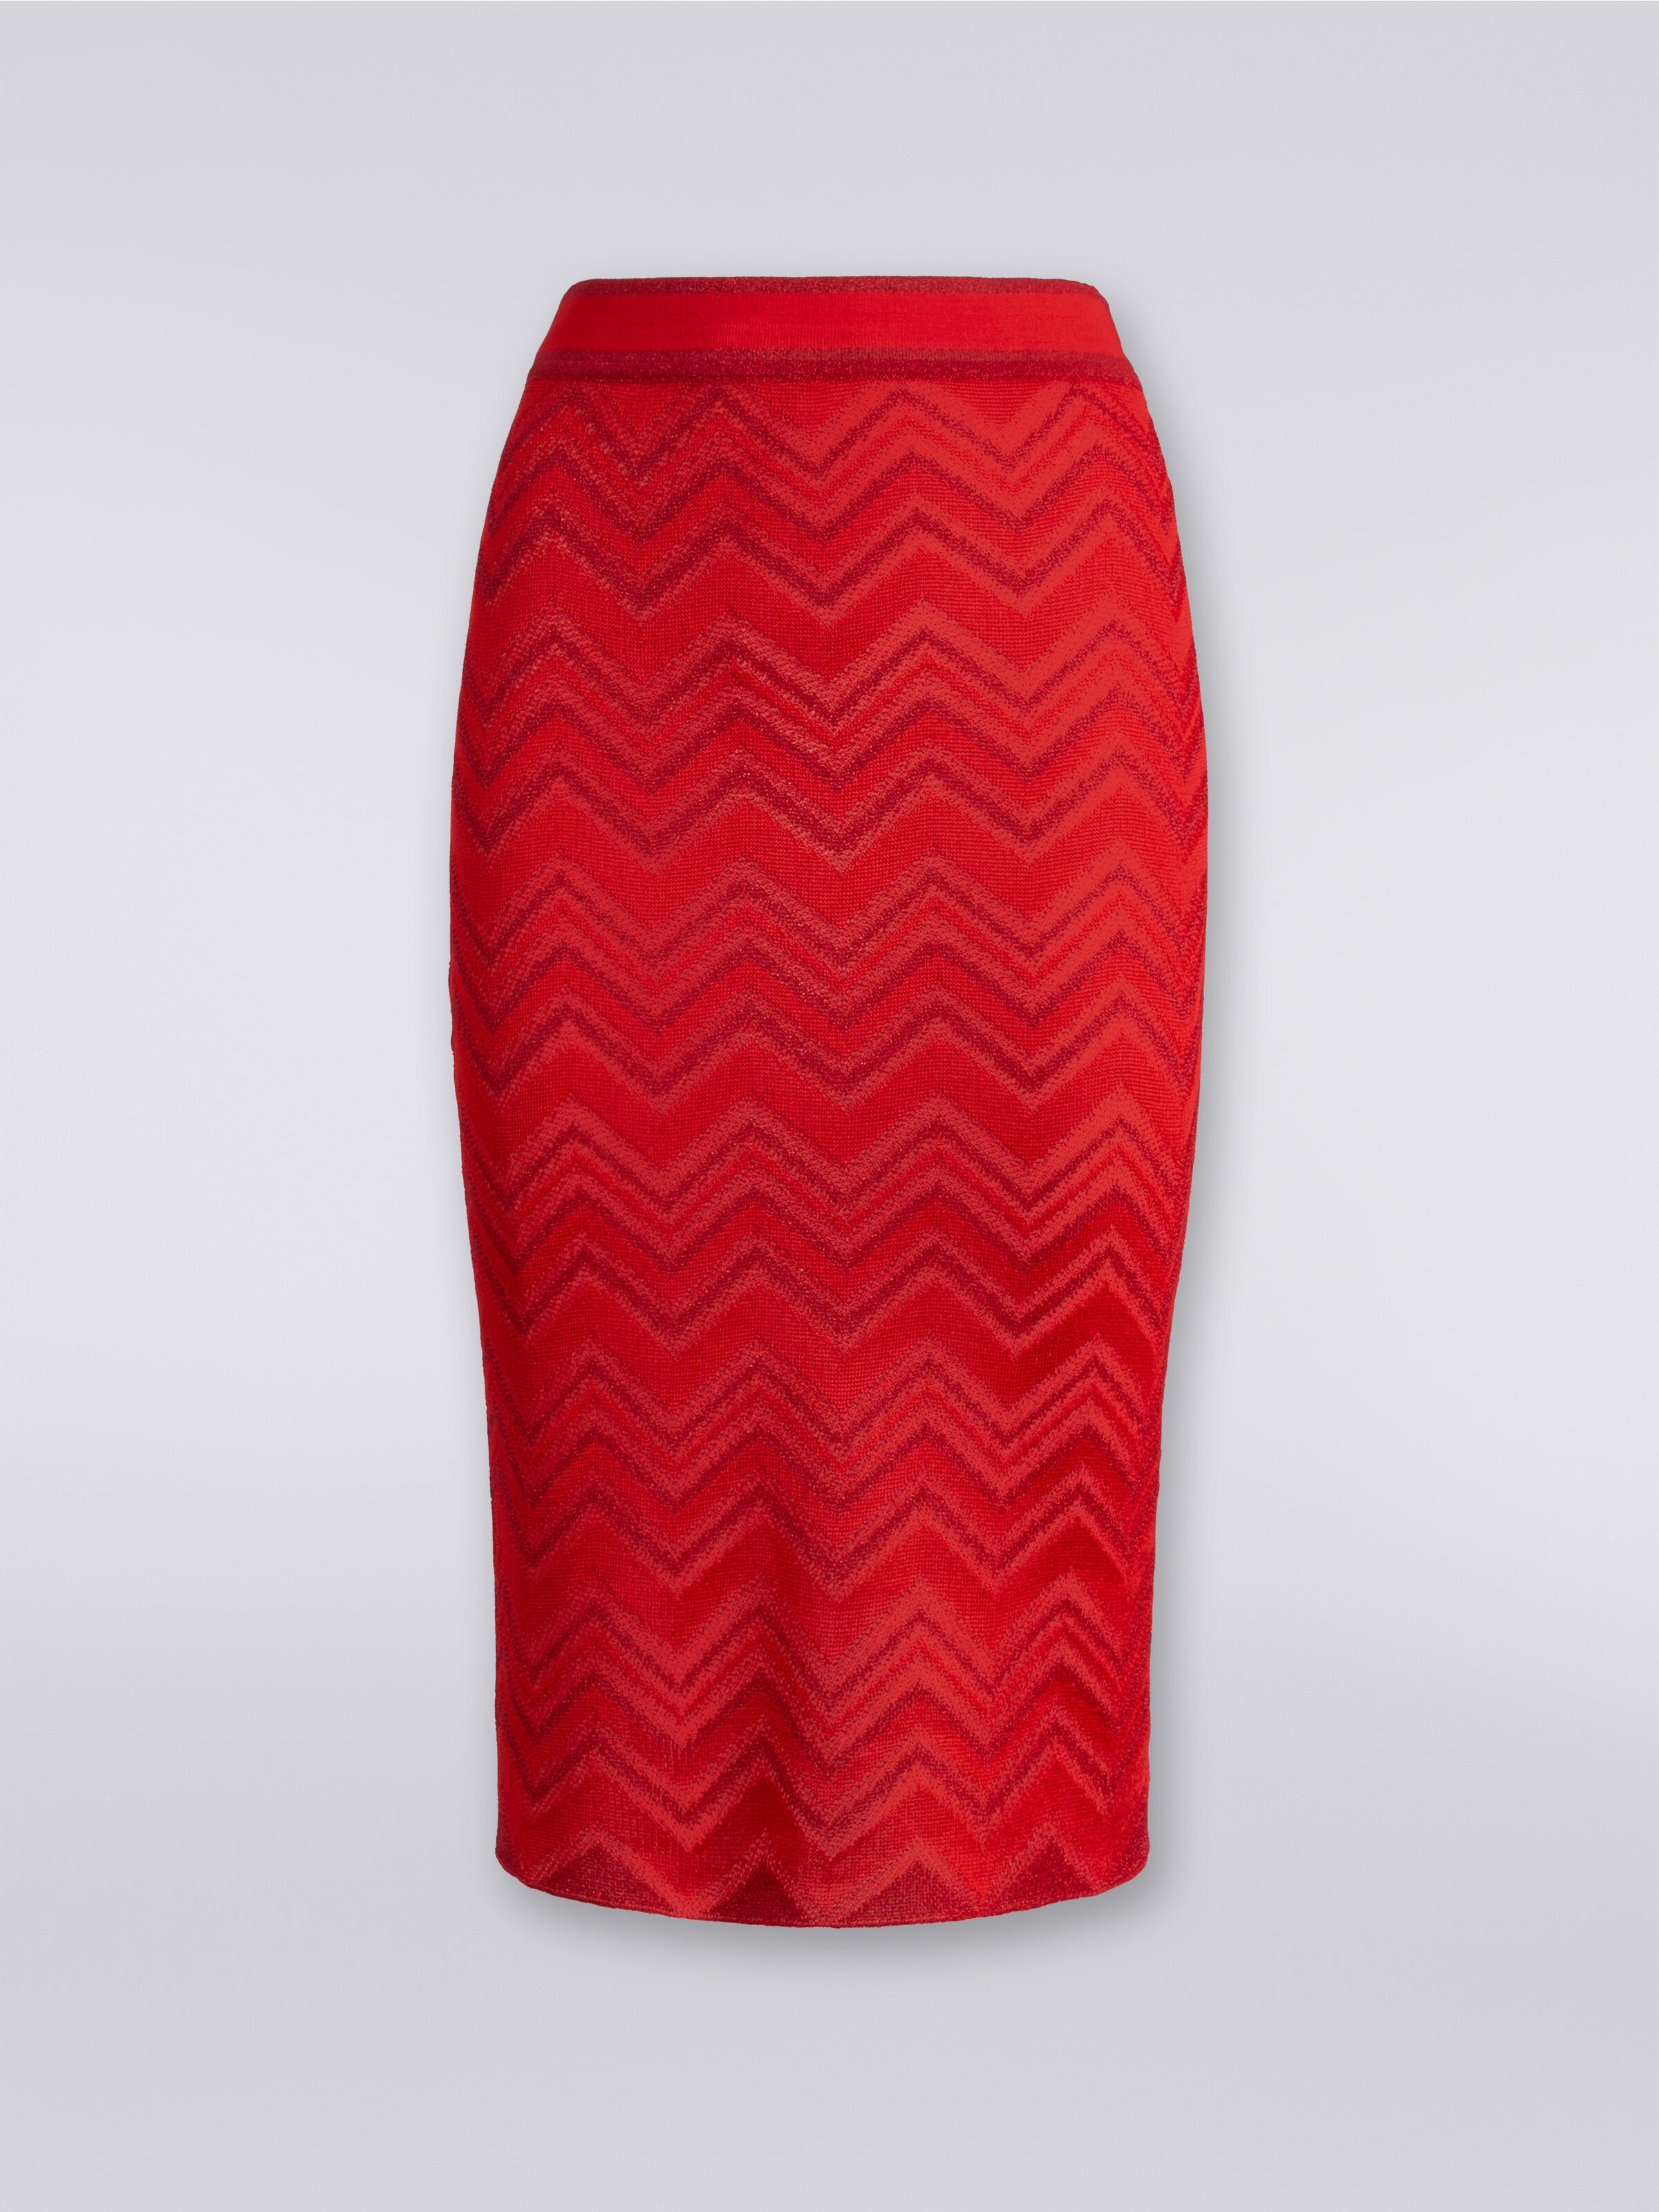 Longuette skirt in zigzag knit with lurex, Red  - 0